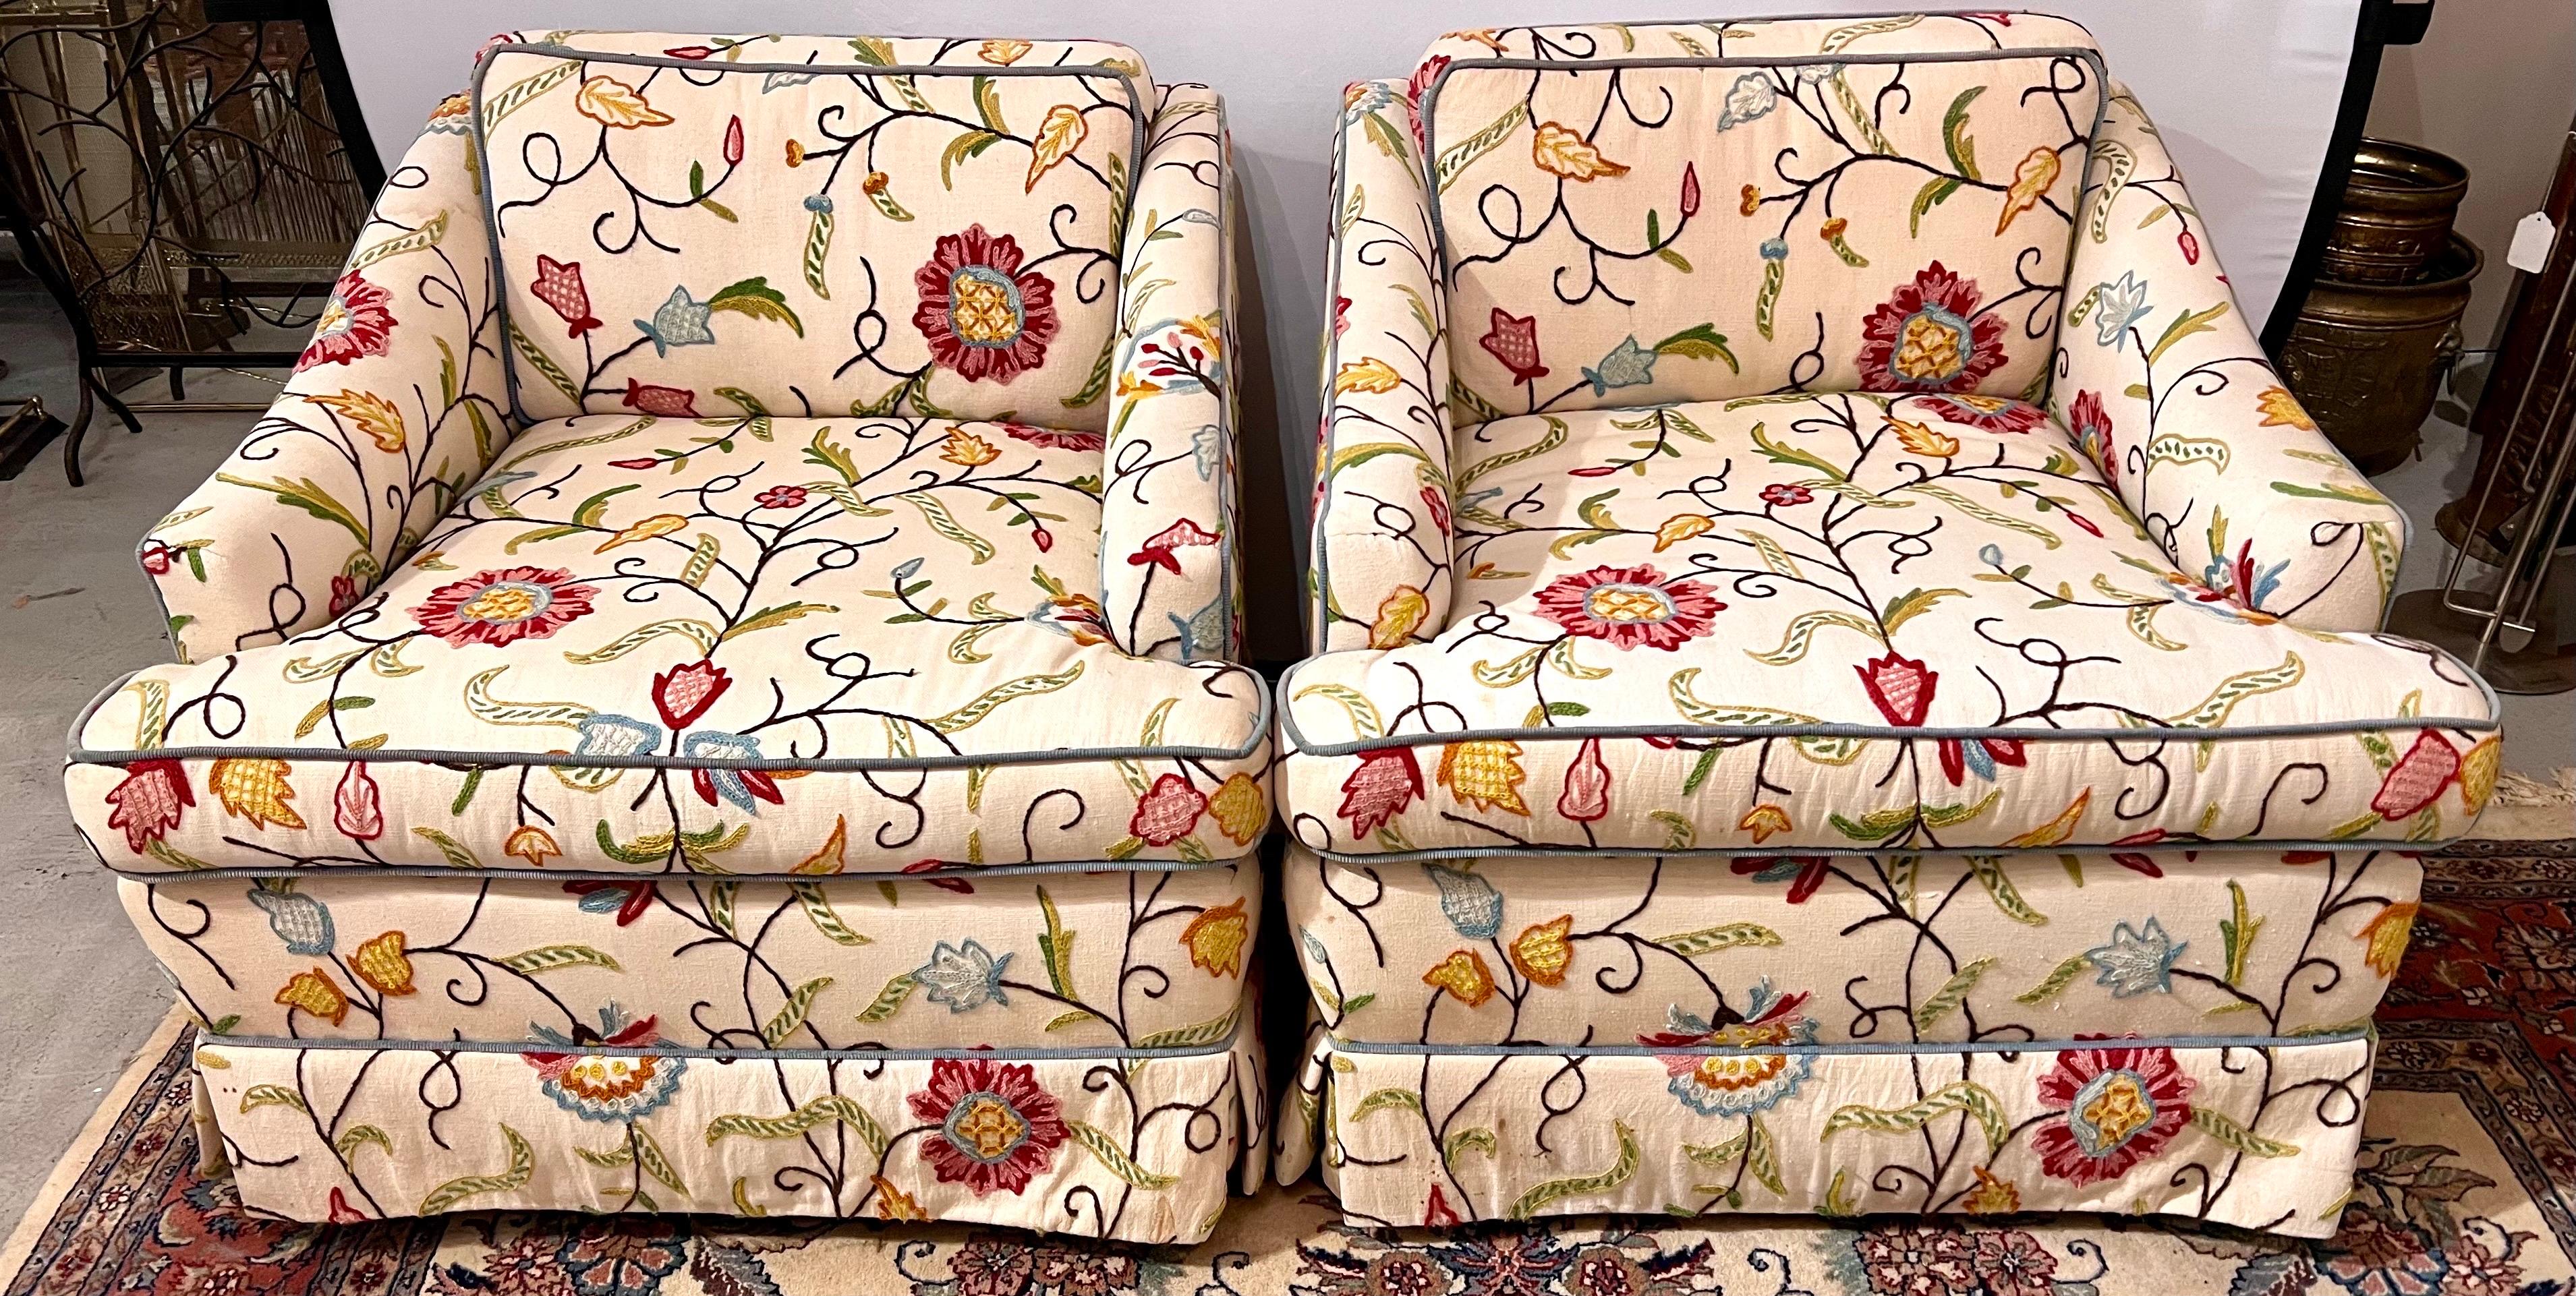 Pair of club chairs upholstered in beautiful Chinoiserie style floral crewel work with blue piping.
Loose seat and back cushion. On castors for ease of movement.